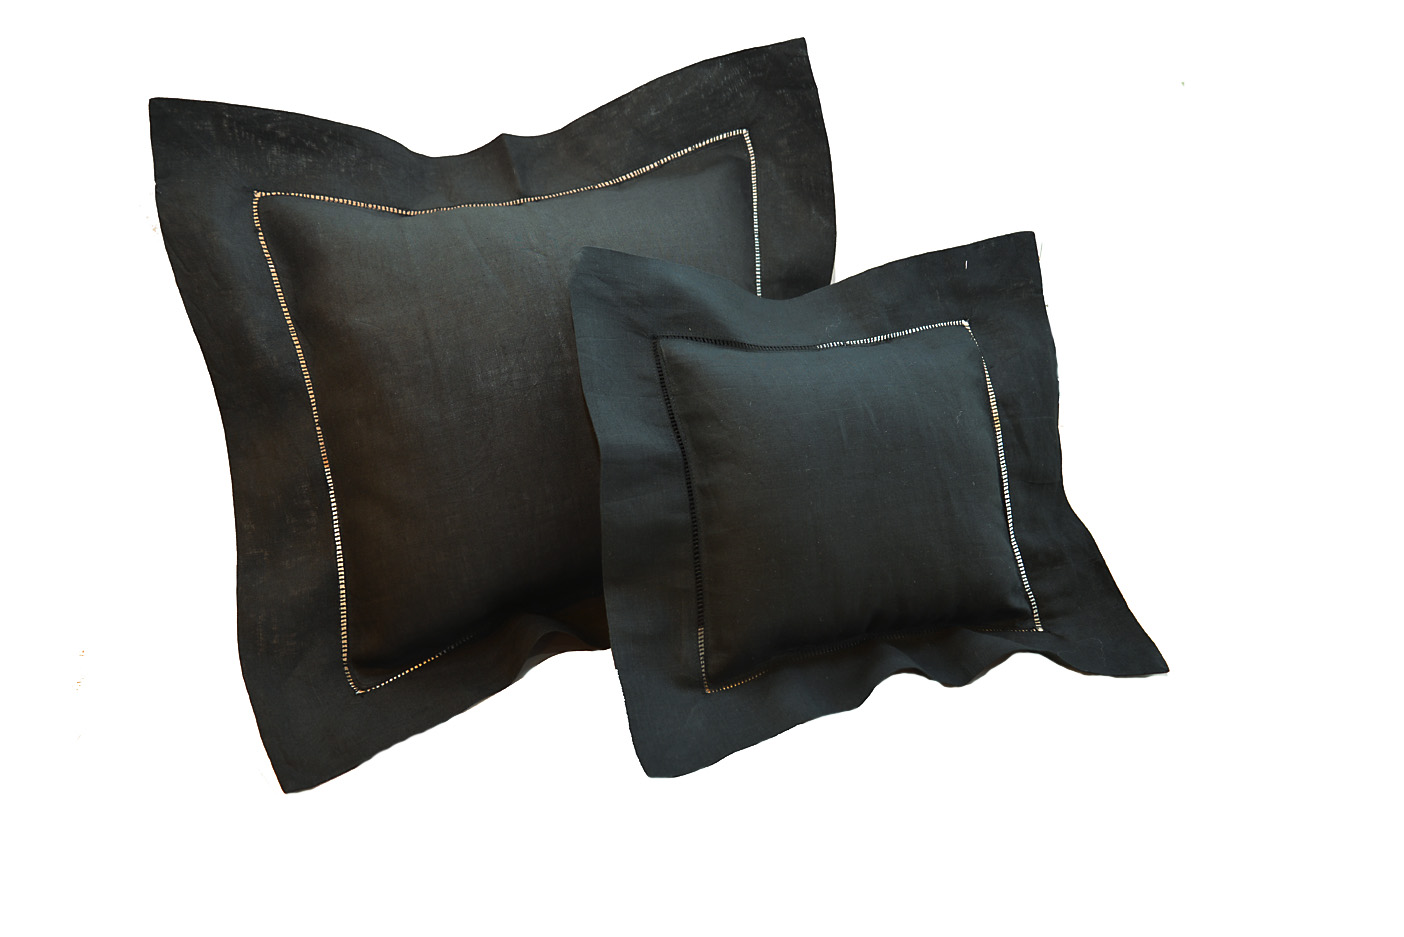 Black colored baby pillows